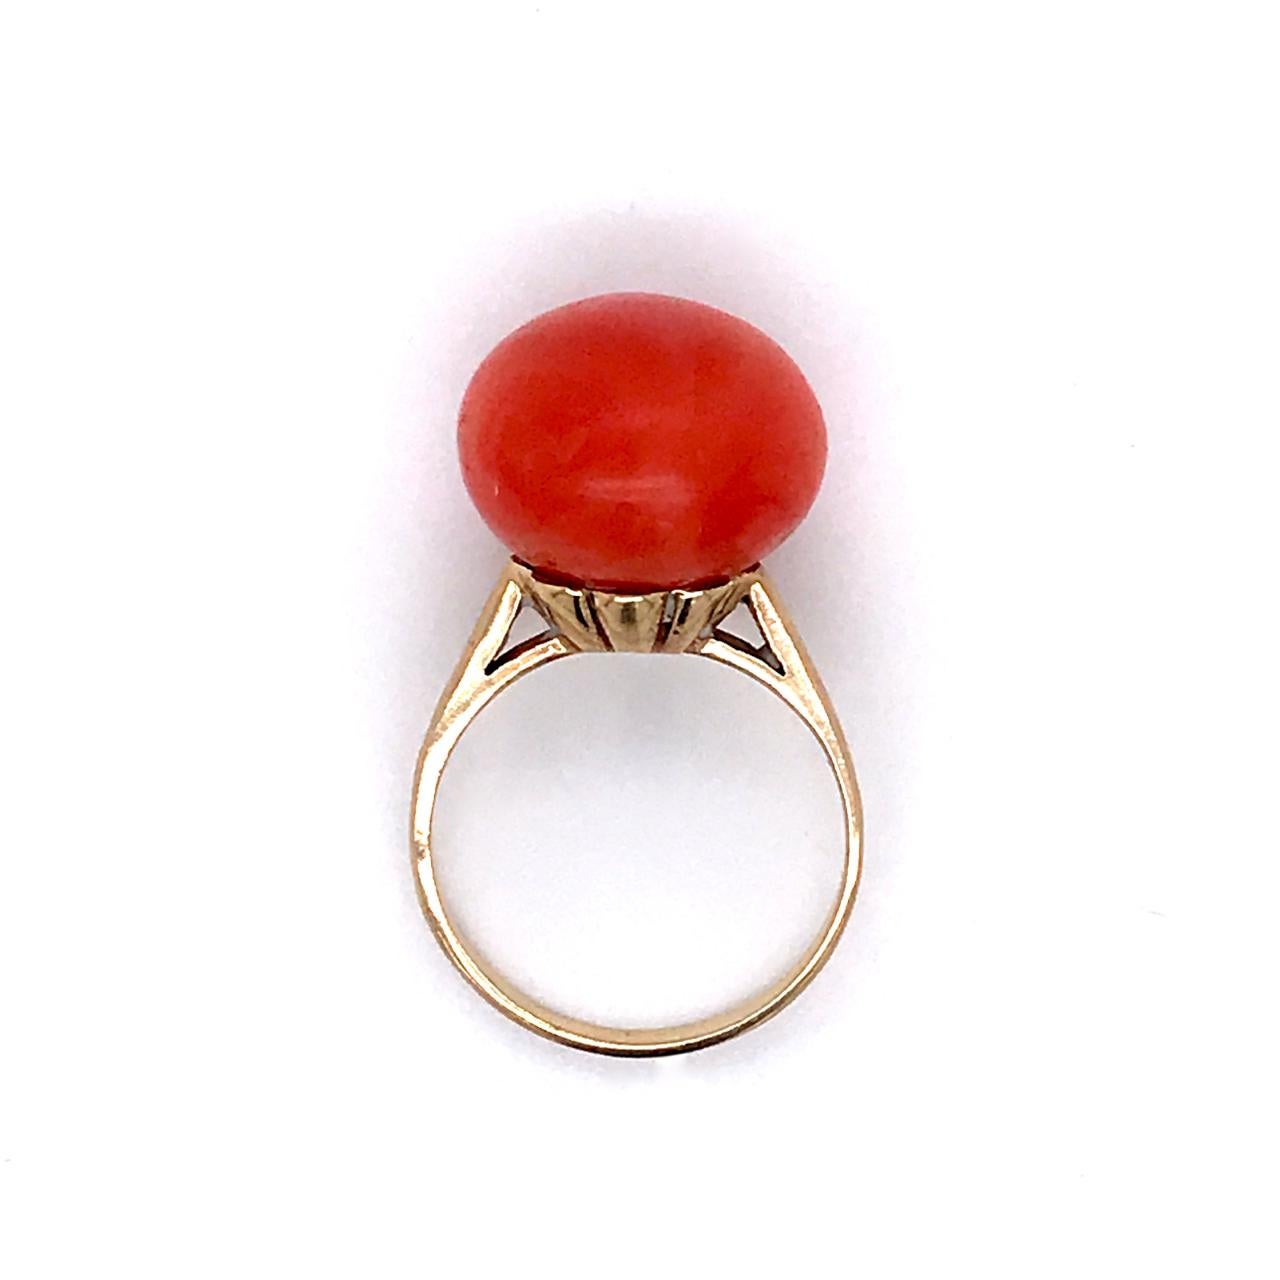 A very fine vintage gold and coral ring.

With a rich salmon or almost red coral button cabochon set in 14k yellow gold setting.

Marked to the shank 14k for gold fineness. 

Ring Size: ca. 5 1/2
Height: ca. 31 mm
Width: ca. 18 mm

Items purchased